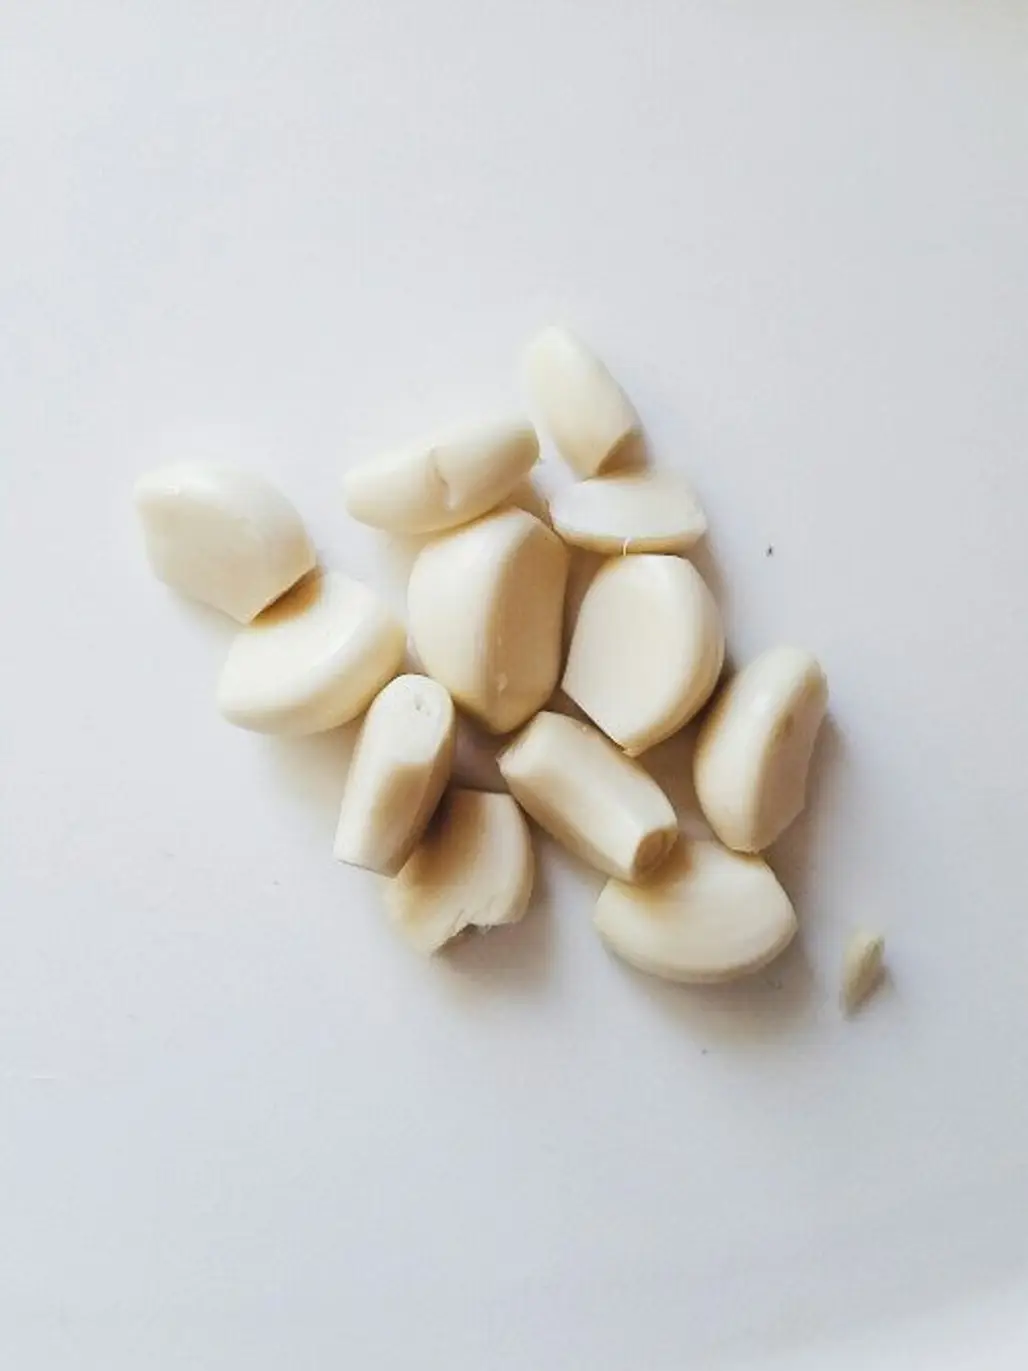 Garlic Might Be Stinky, but It’s Good for You